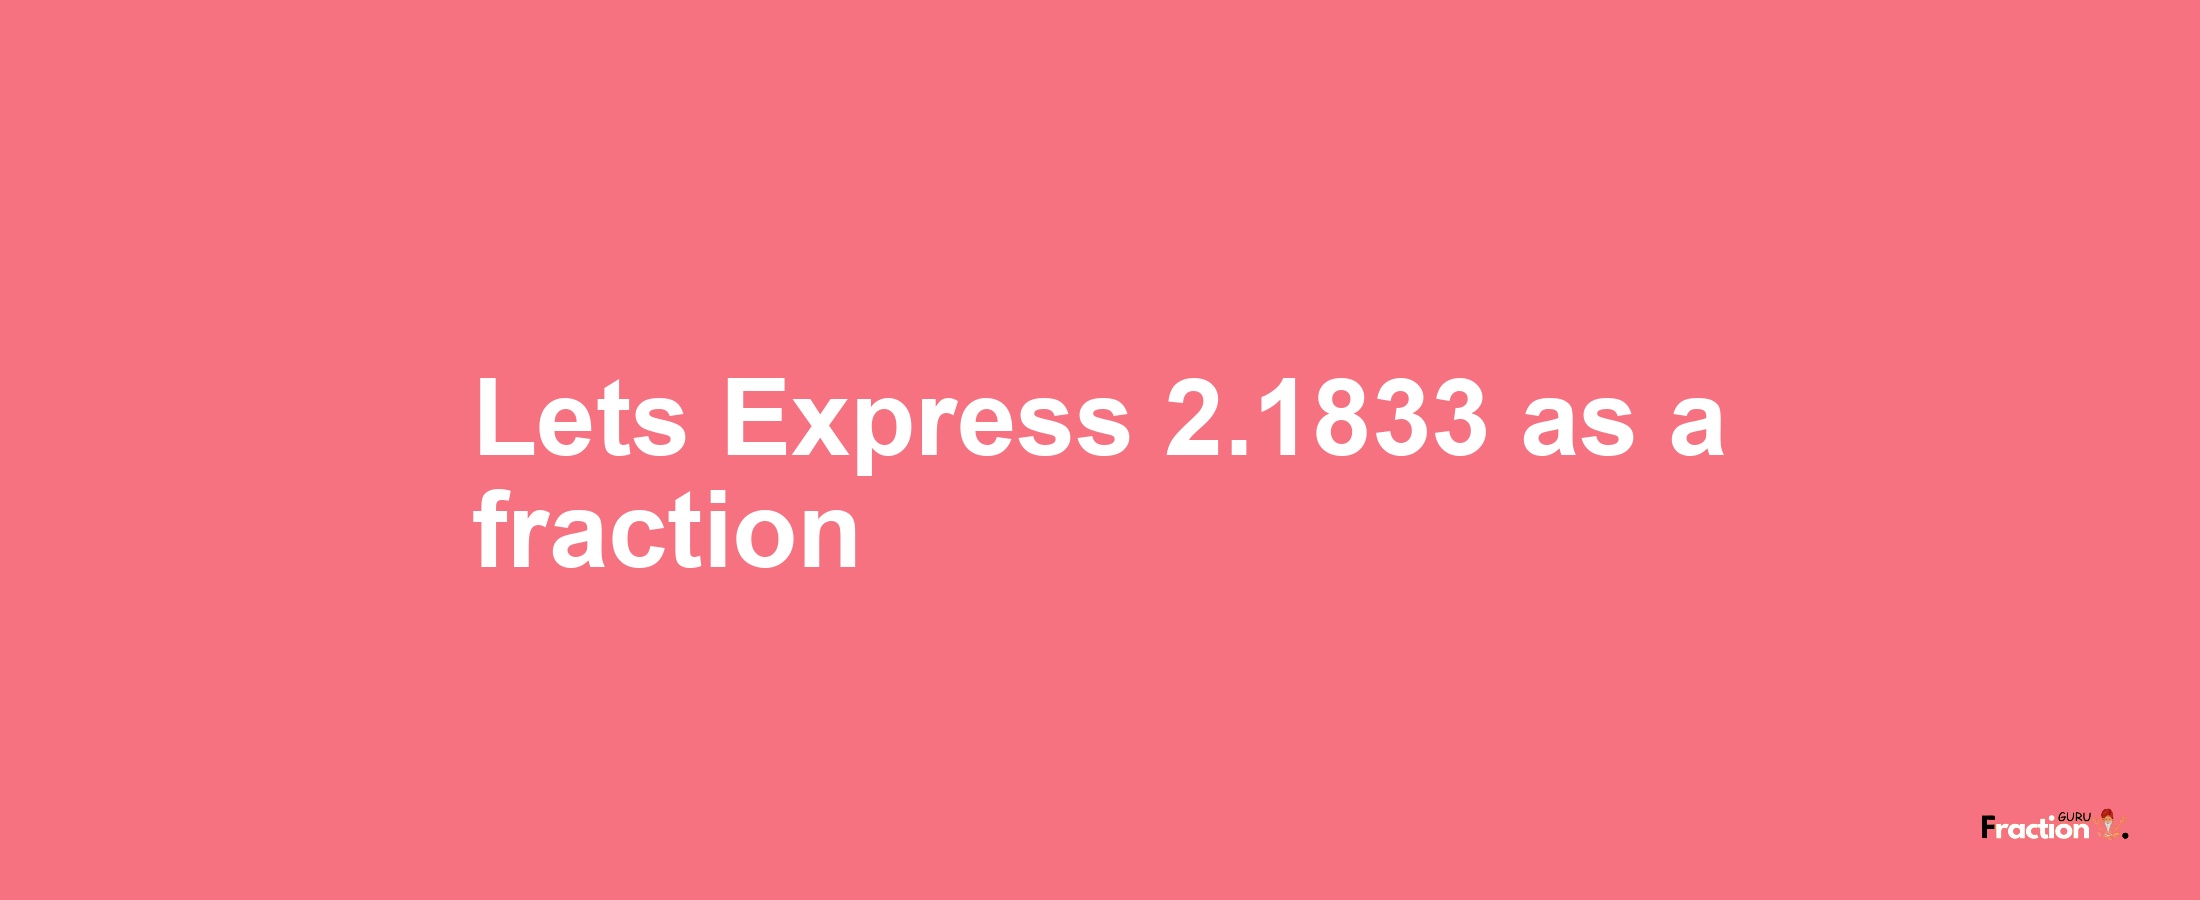 Lets Express 2.1833 as afraction